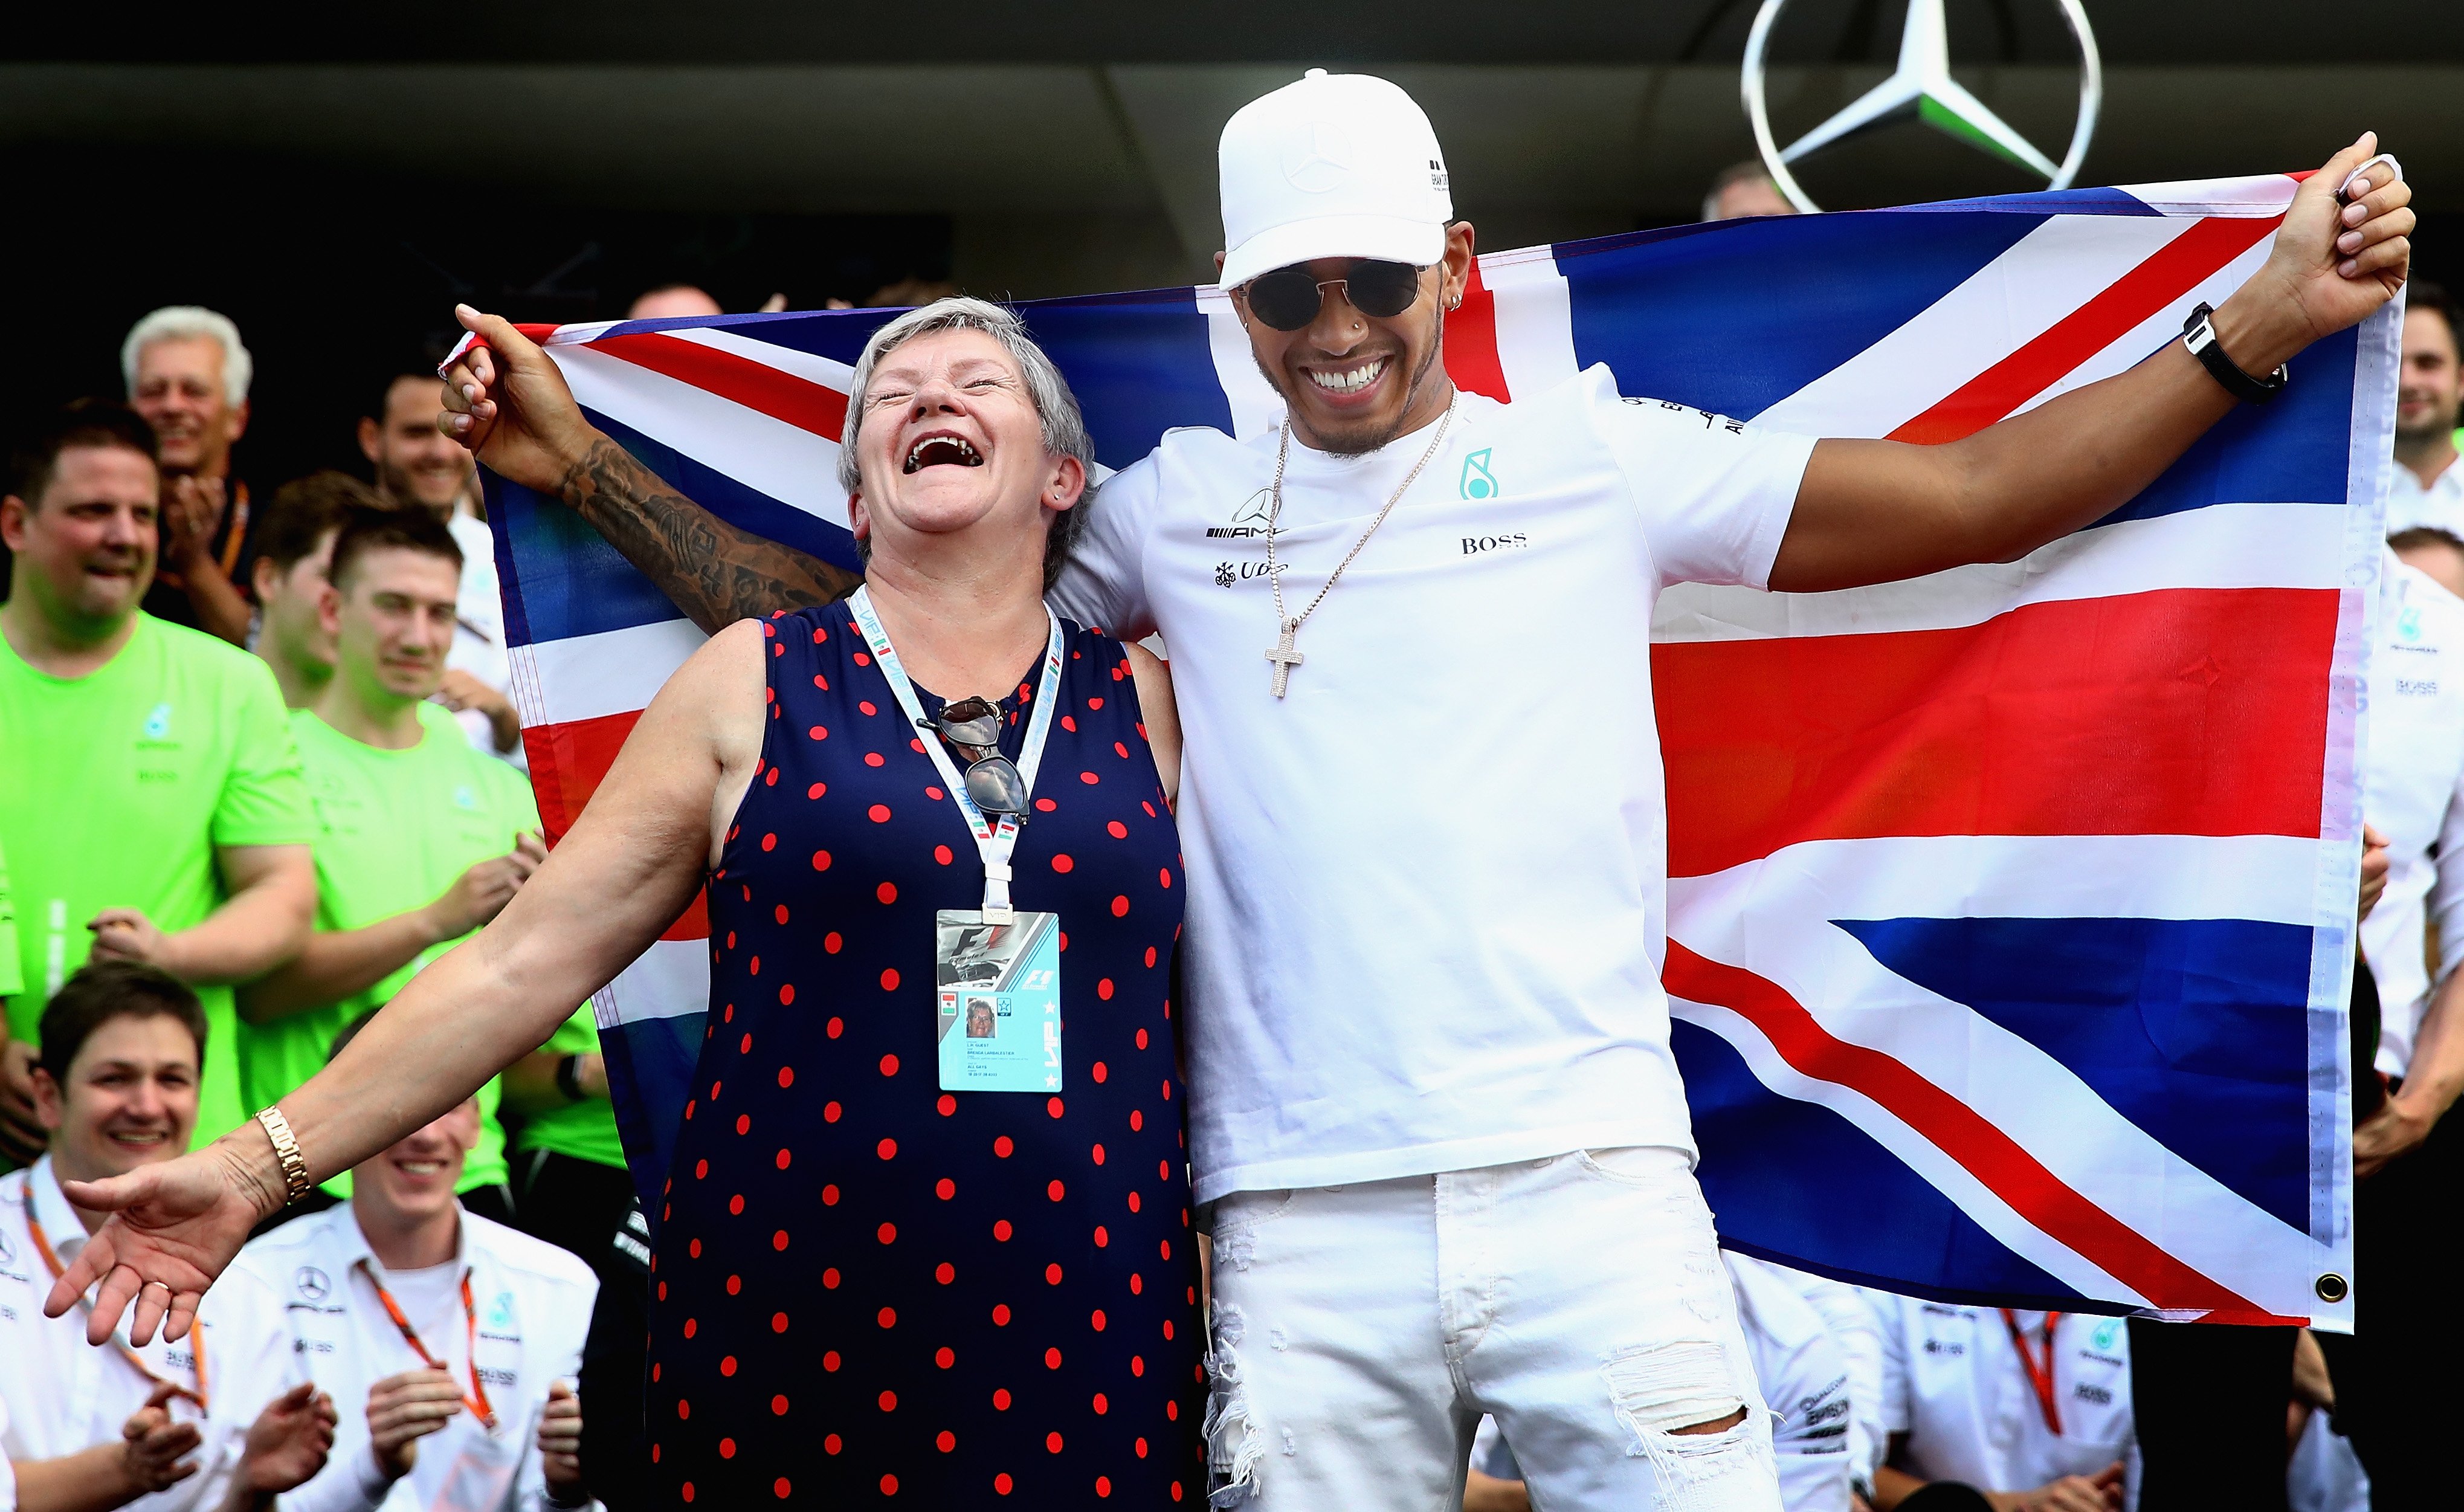 Lewis Hamilton celebrates with his mother Carmen Larbalestier after winning his fourth F1 World Drivers Championship after the Formula One Grand Prix of Mexico at Autodromo Hermanos Rodriguez on October 29, 2017, in Mexico City, Mexico. | Source: Getty Images